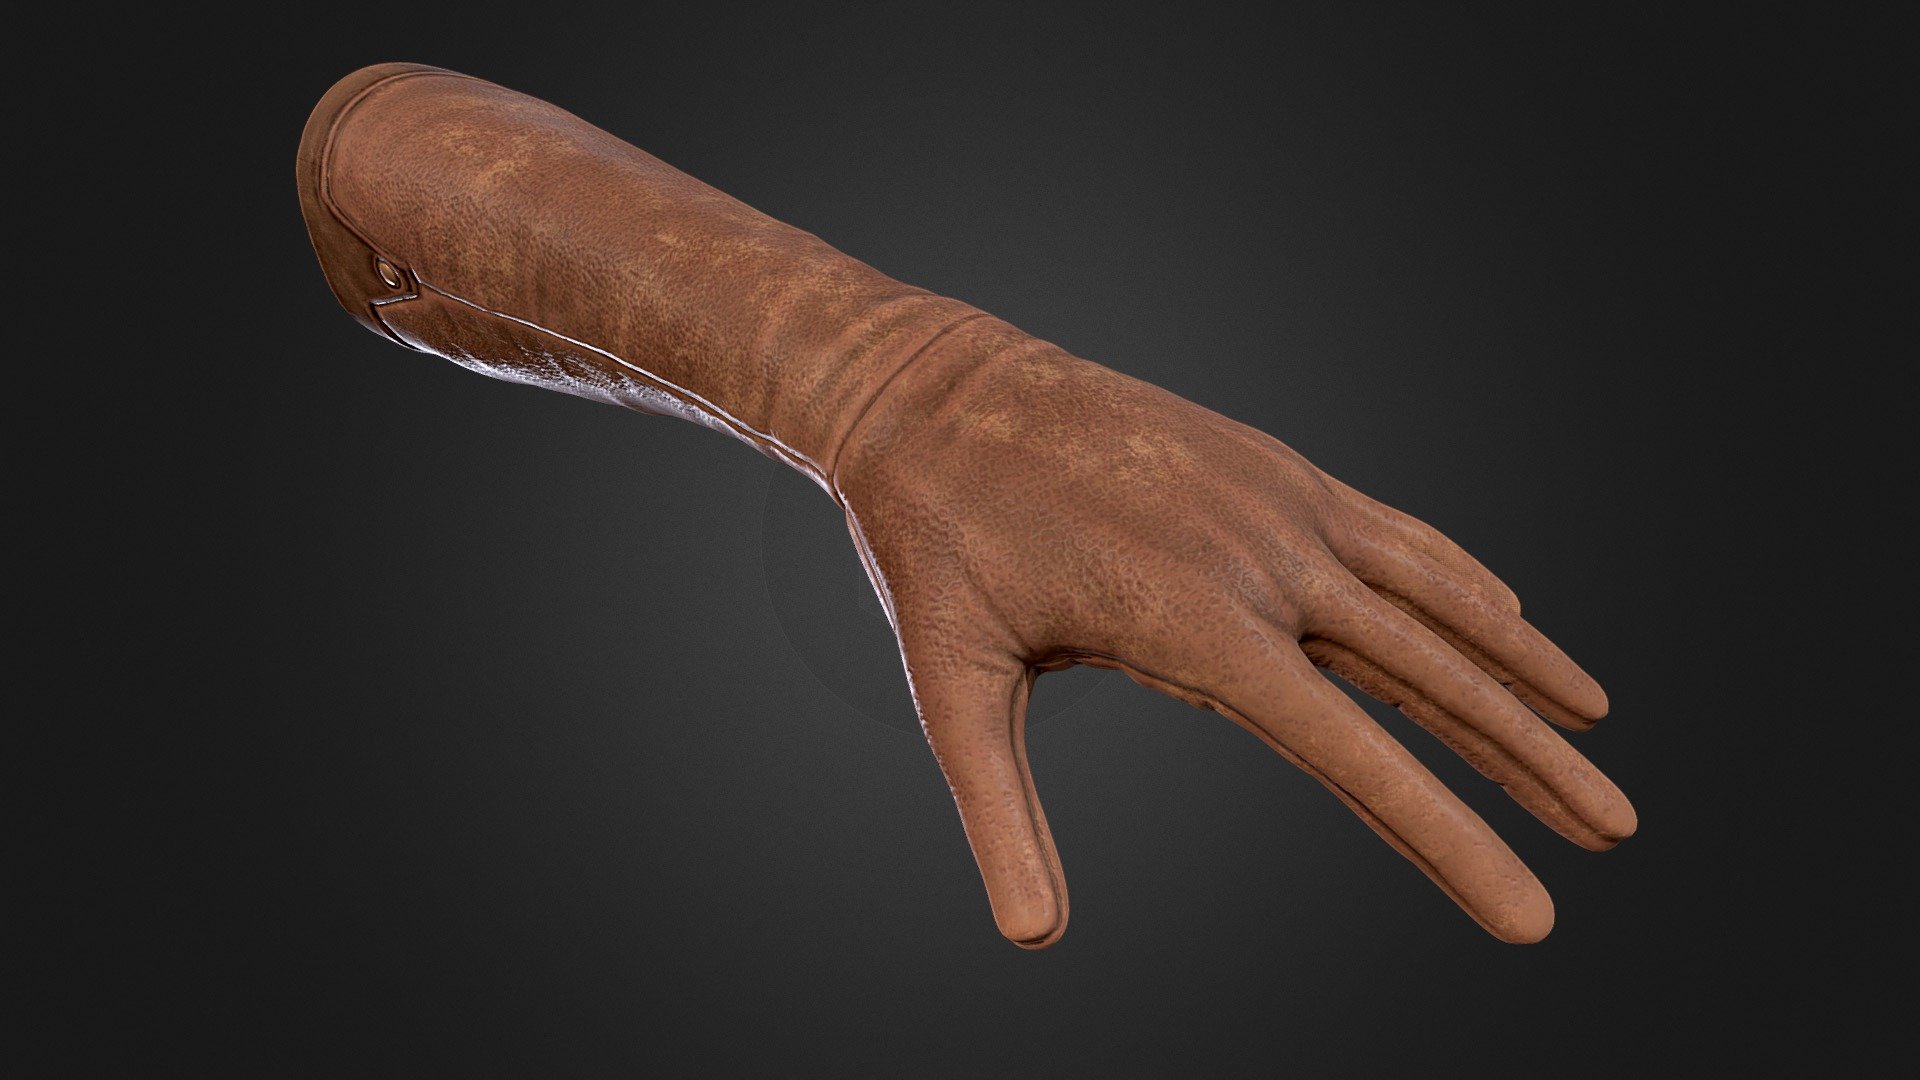 A simple leather glove, zremeshed, auto UV via Zbrush.




Baked and Textured in 4096 x 4096 PBR via Marmoset Toolbag 4

High density mesh but perfect for first person (requires rigging)

Water tight mesh so it can be 3D printed (adjust scale to suit)

Good starting point for sculpting

I cant make it any cheaper than $3.99 sorry, Sketchfab lowest price setting is $3.99 - Generic Leather Glove - 3D model by POLYTRICITY (@PolytricityLtd) 3d model